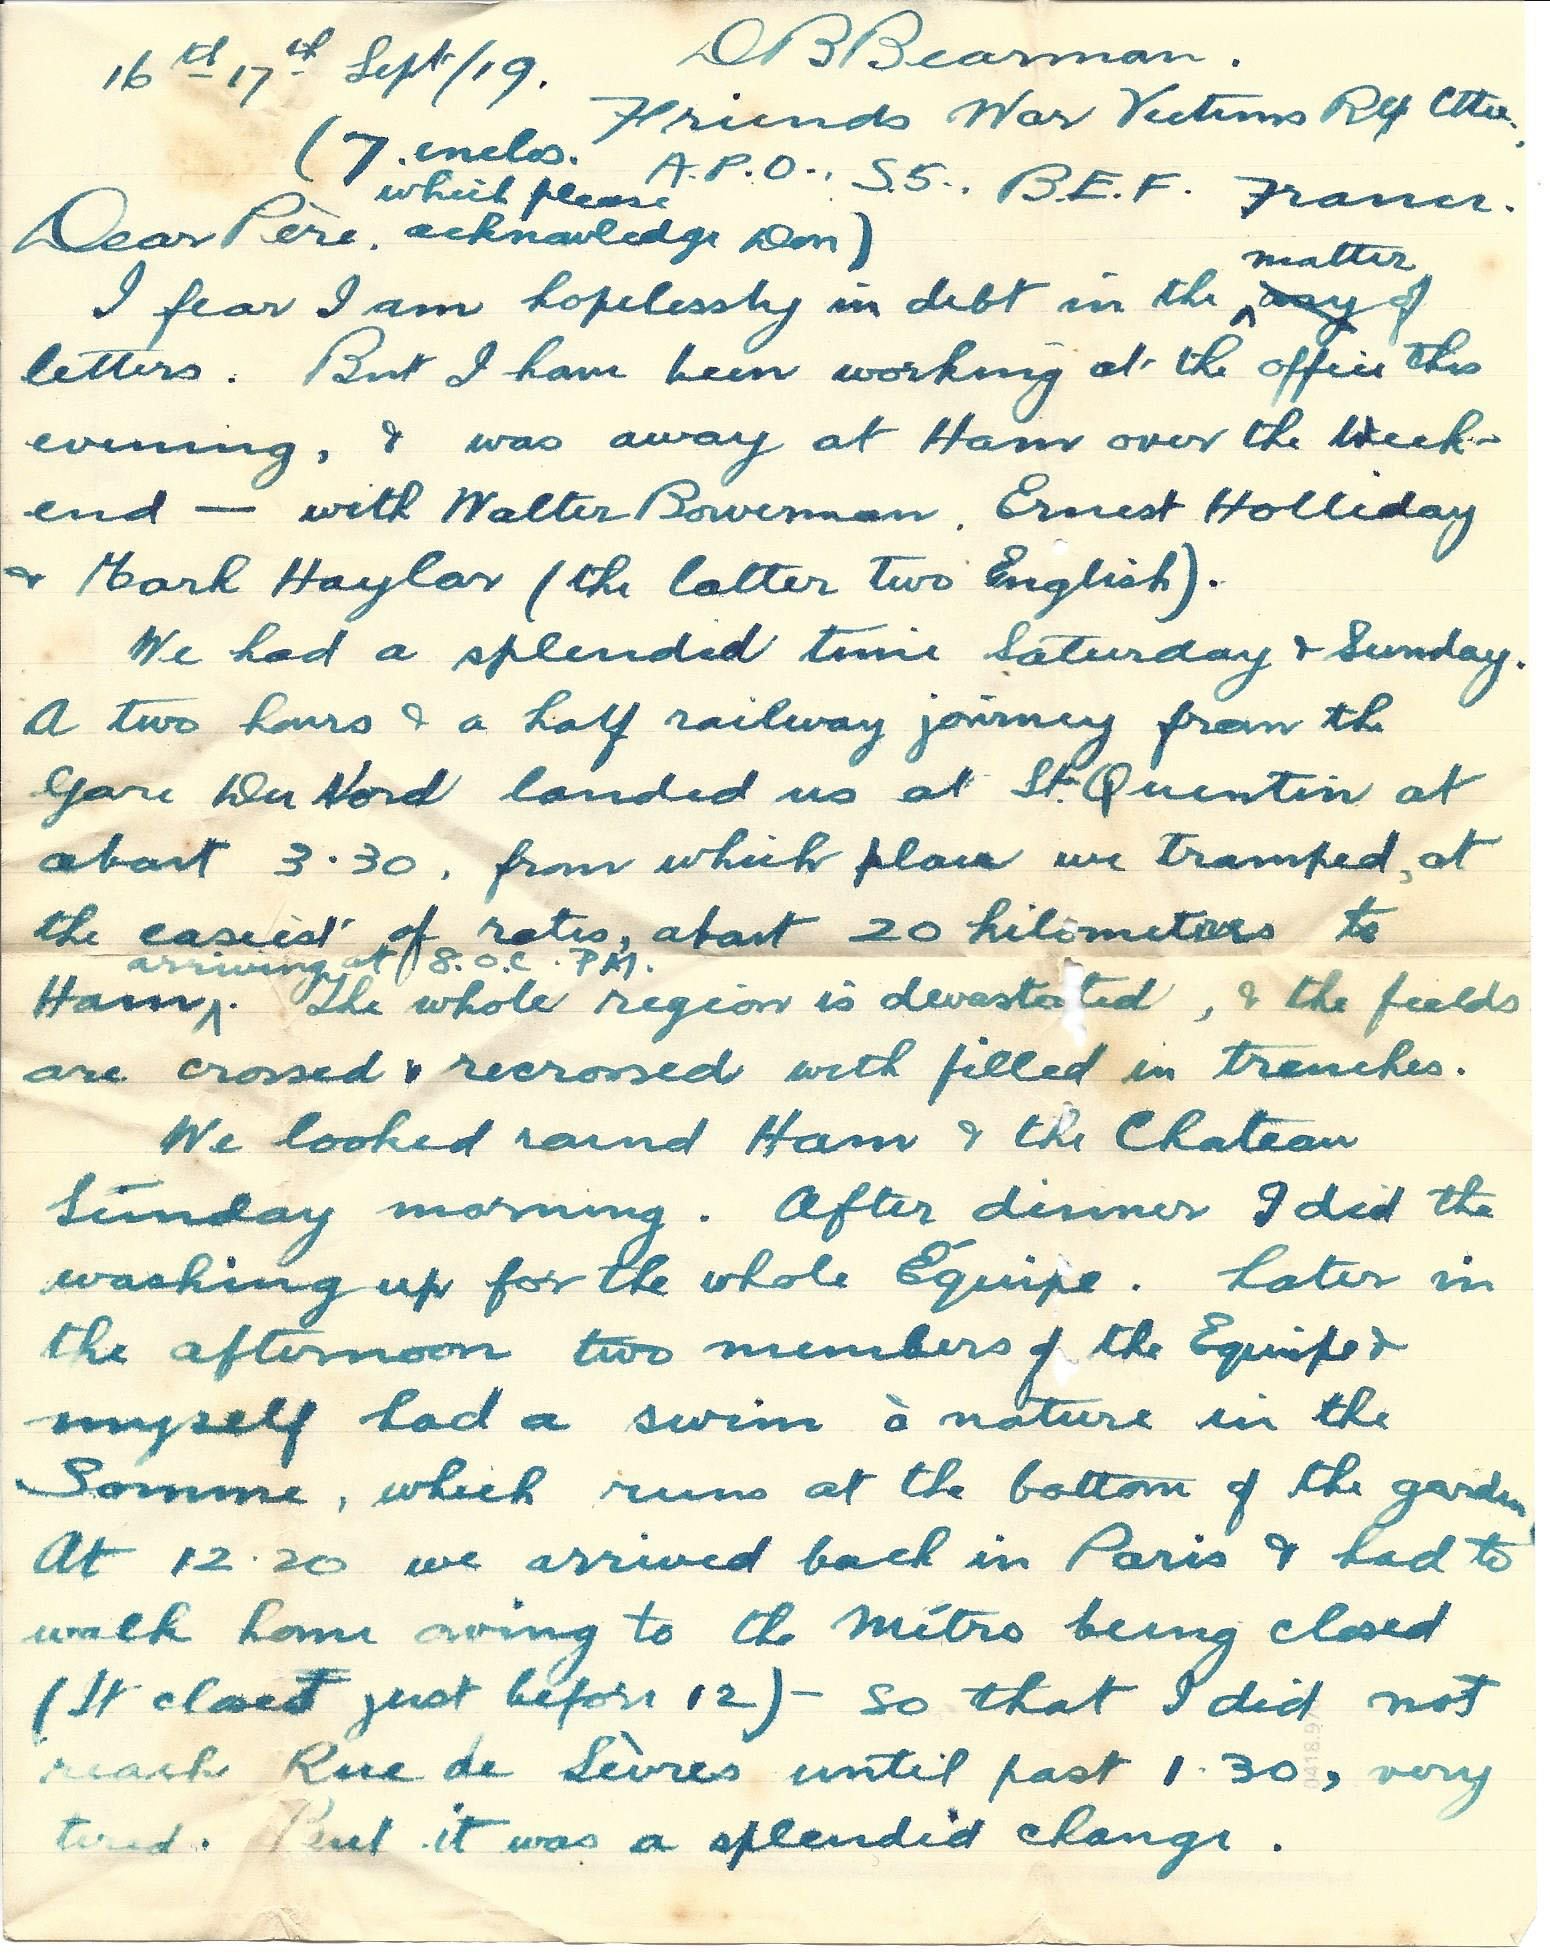 1919-09-16 p1 Donald Bearman letter to his father